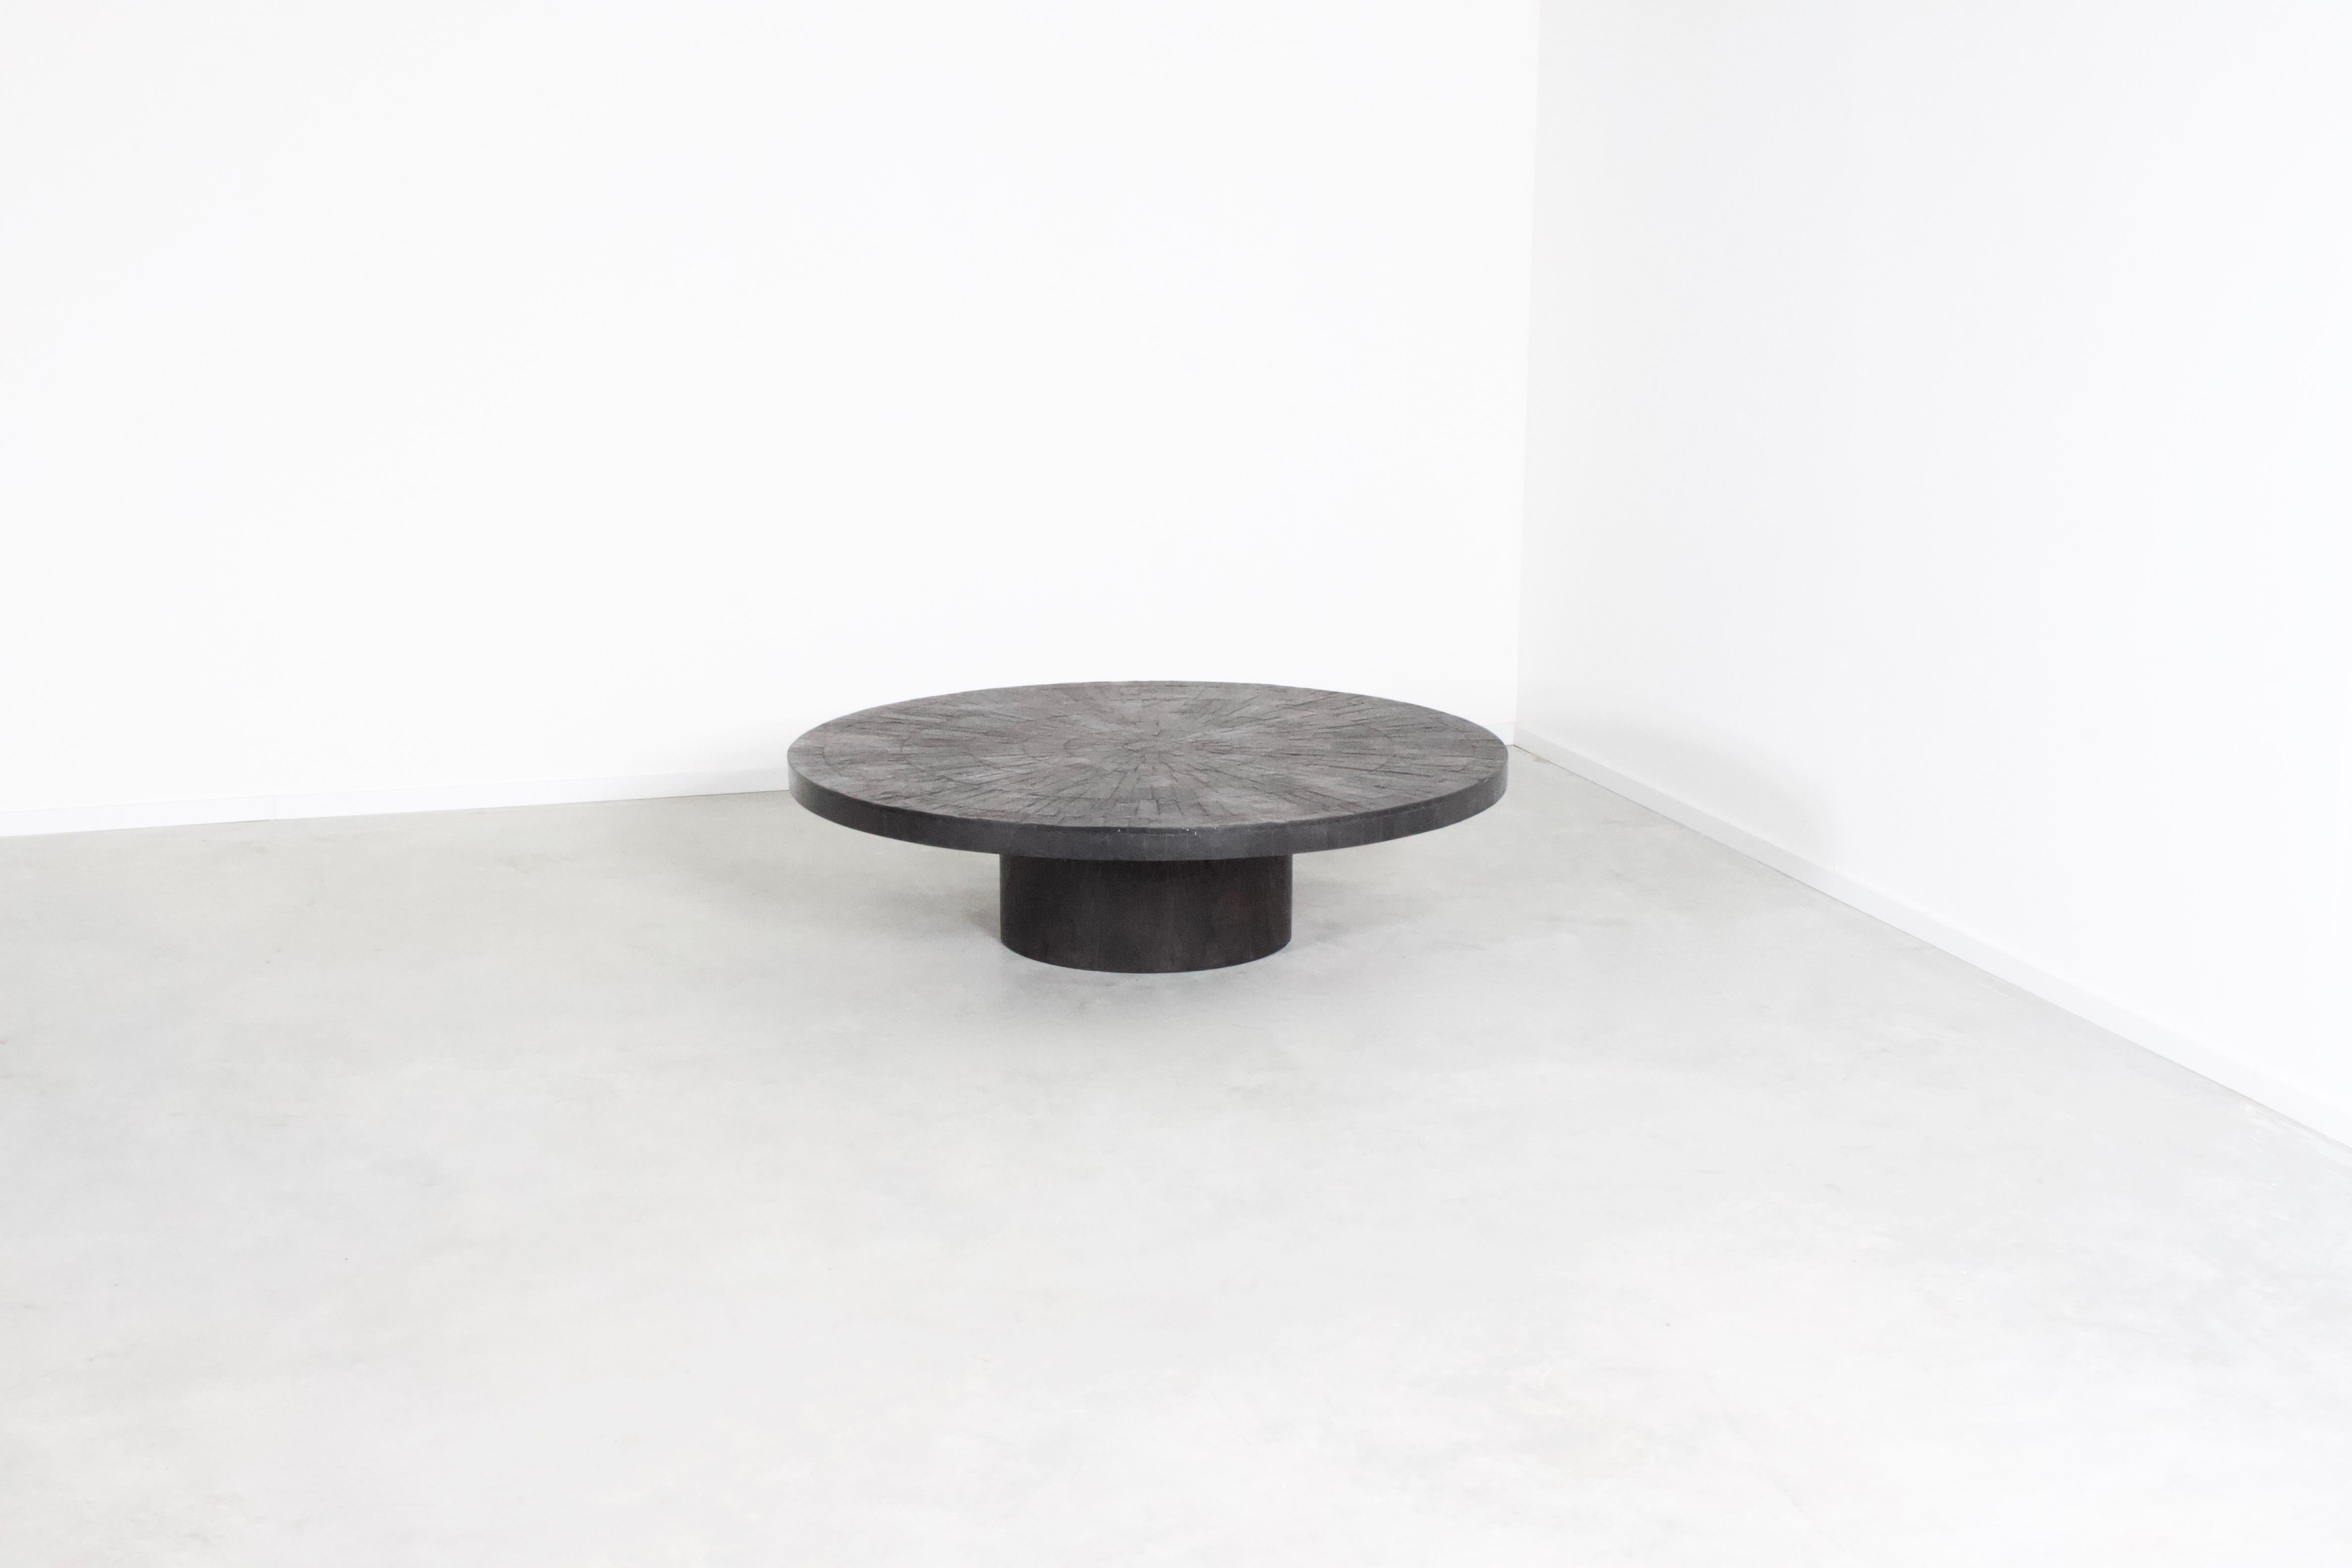 Beautiful 1970s mosaic coffee table in very good condition.

Designed by Heinz Lilienthal

The round top of this table is made in a beautiful black slate mosaic.

The rims of the top are also made of slate.

The centered round base is made of